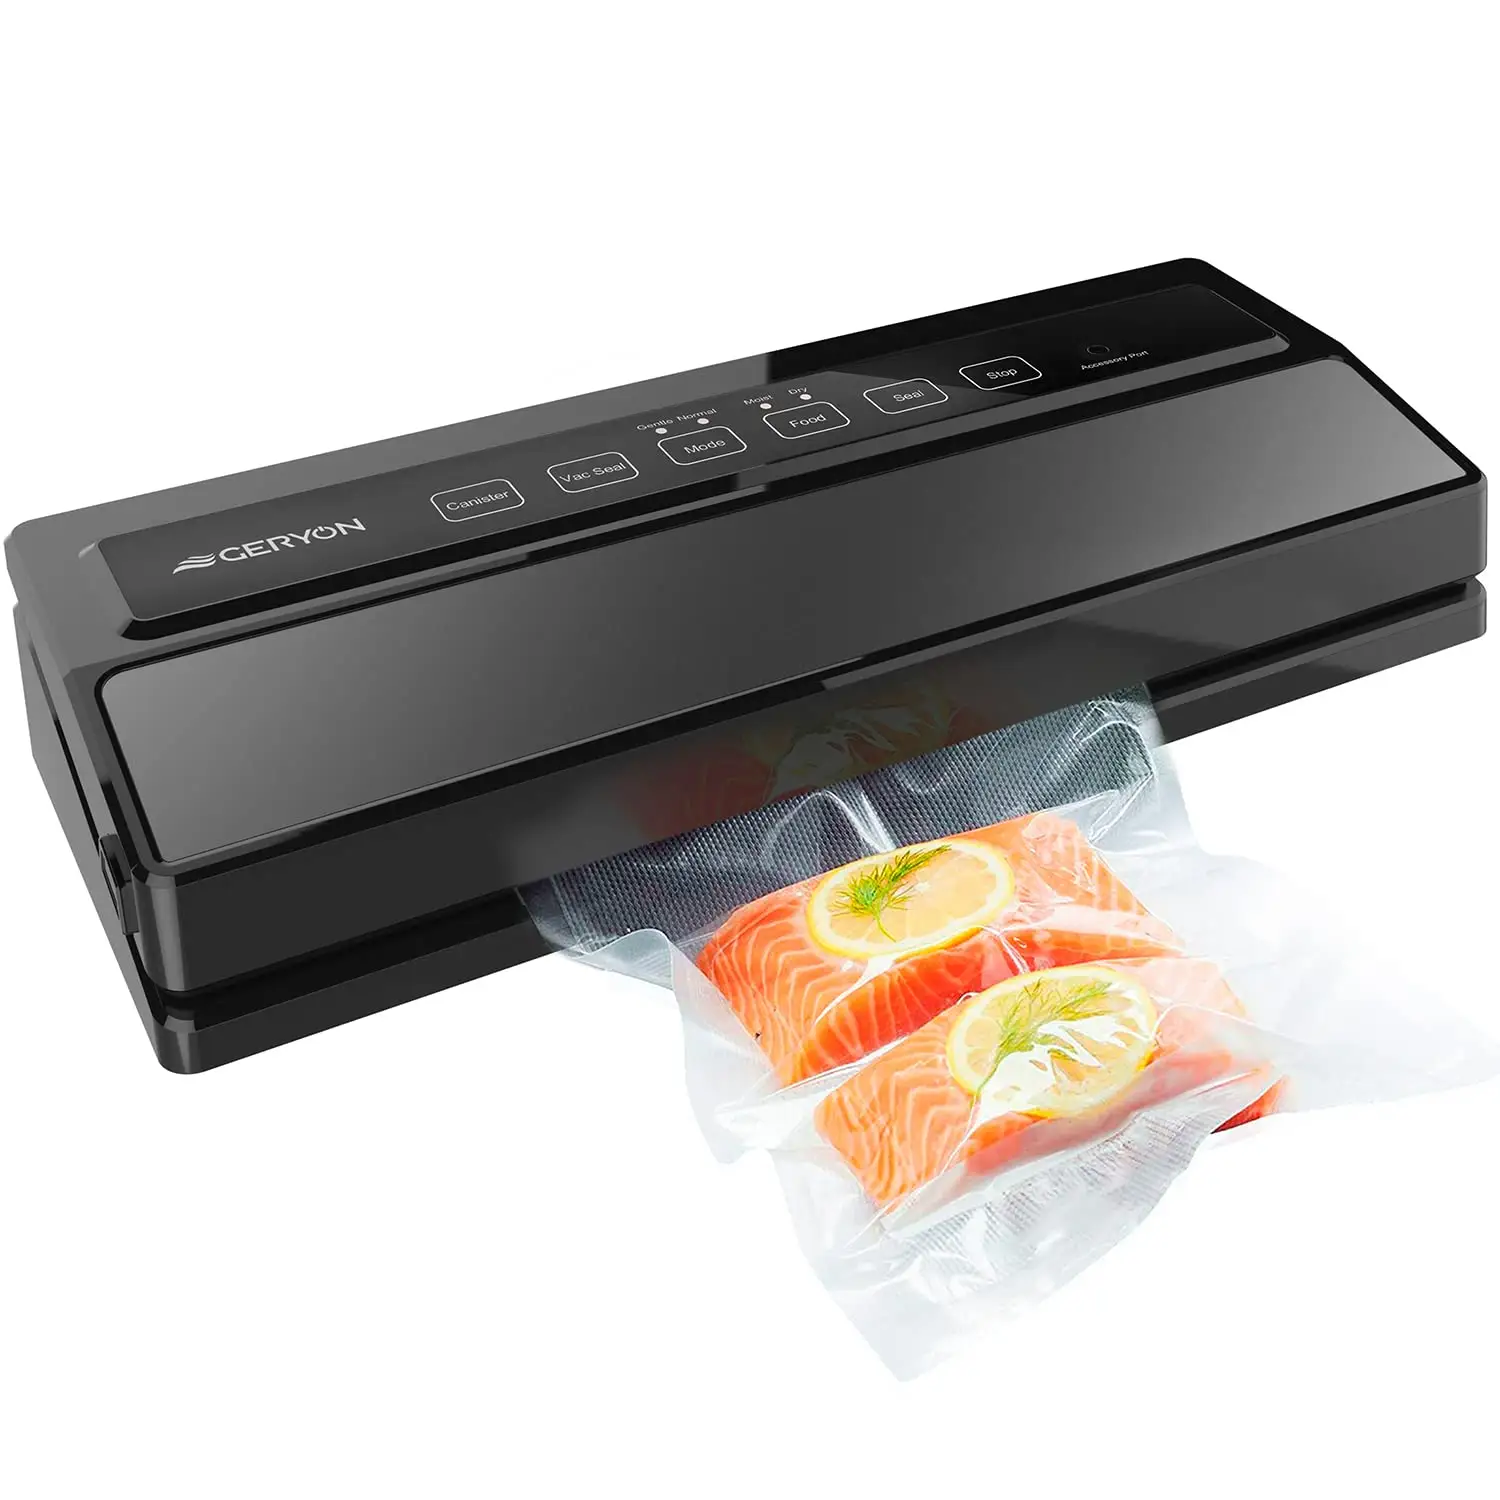 GERYON Cheap Stock Fresh Food Vacuum Sealers Packing Portable Electronic Home Use Automatic Vacuum Sealer Machine for sale